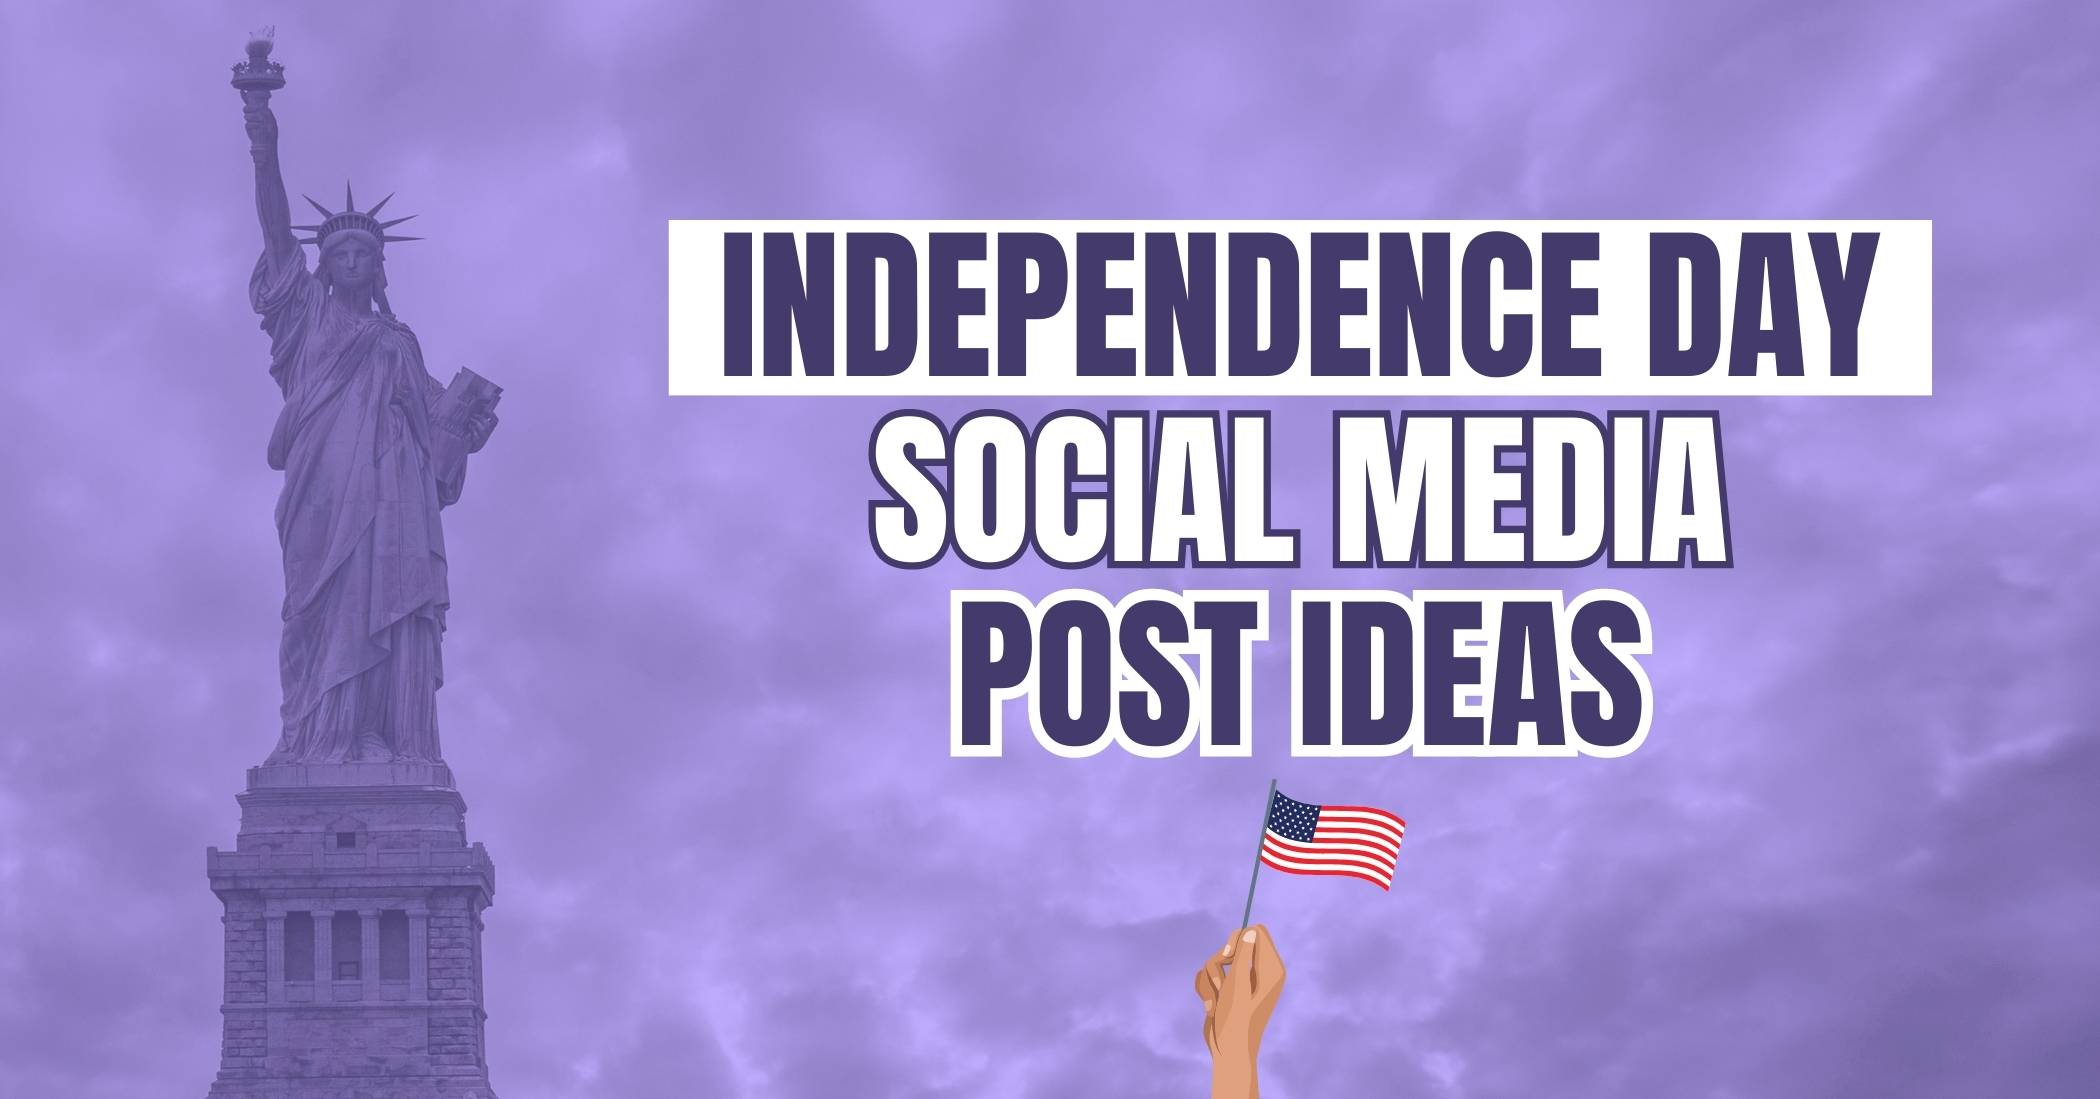 Independence Day Social Media Post Ideas